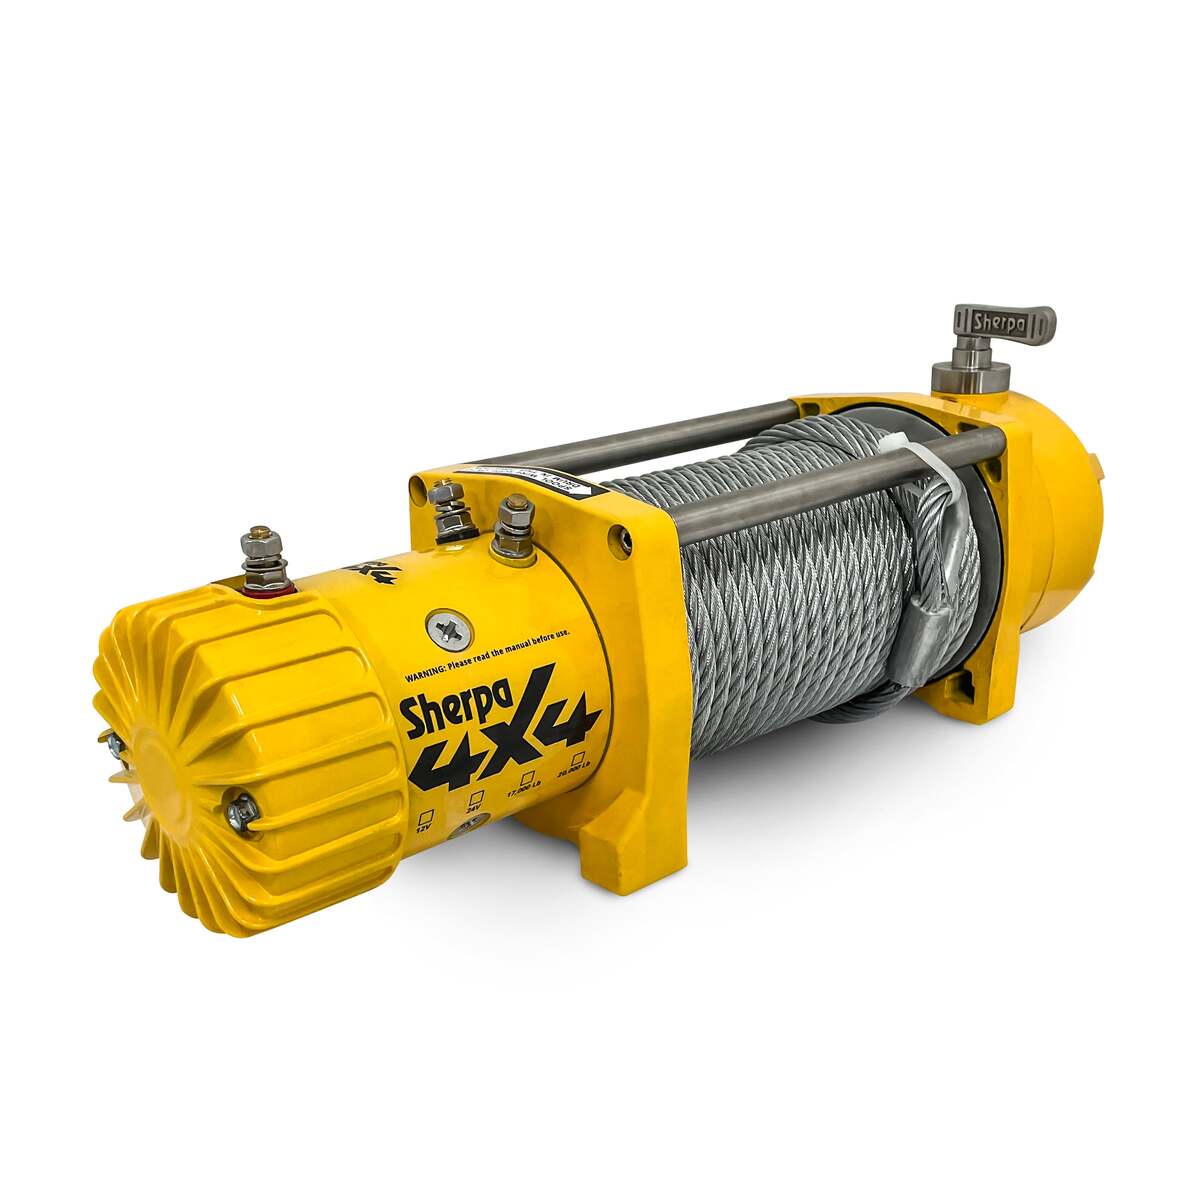 Sherpa Stallion Winch 24V Winch 17,000lb, 45m cable Outback Equipment